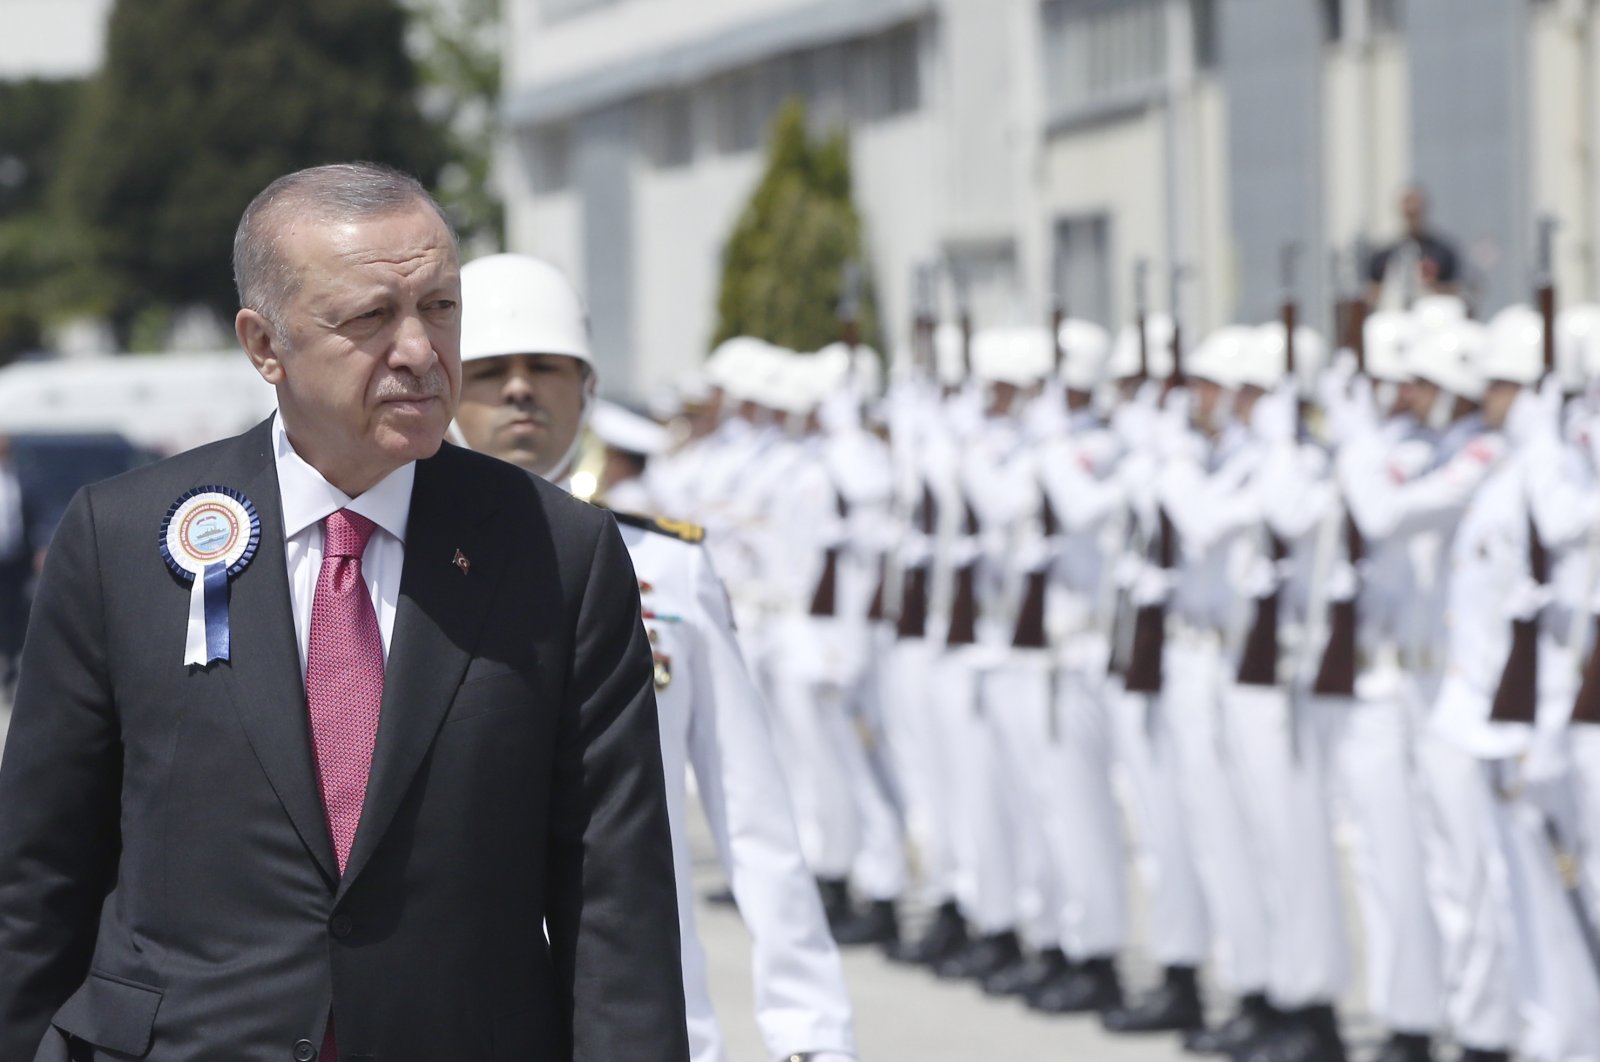 President Recep Tayyip Erdogan inspects a military honor guard during a ceremony marking the docking of the Hızır Reis and the first welding of the Selman Reis submarines, Kocaeli, Turkey, May 23, 2022. Erdogan, whose country has objected to Sweden and Finland joining NATO, called on Stockholm to take &quot;concrete steps&quot; that would alleviate Turkey&#039;s security concerns. (Turkish Presidency via AP Photo)